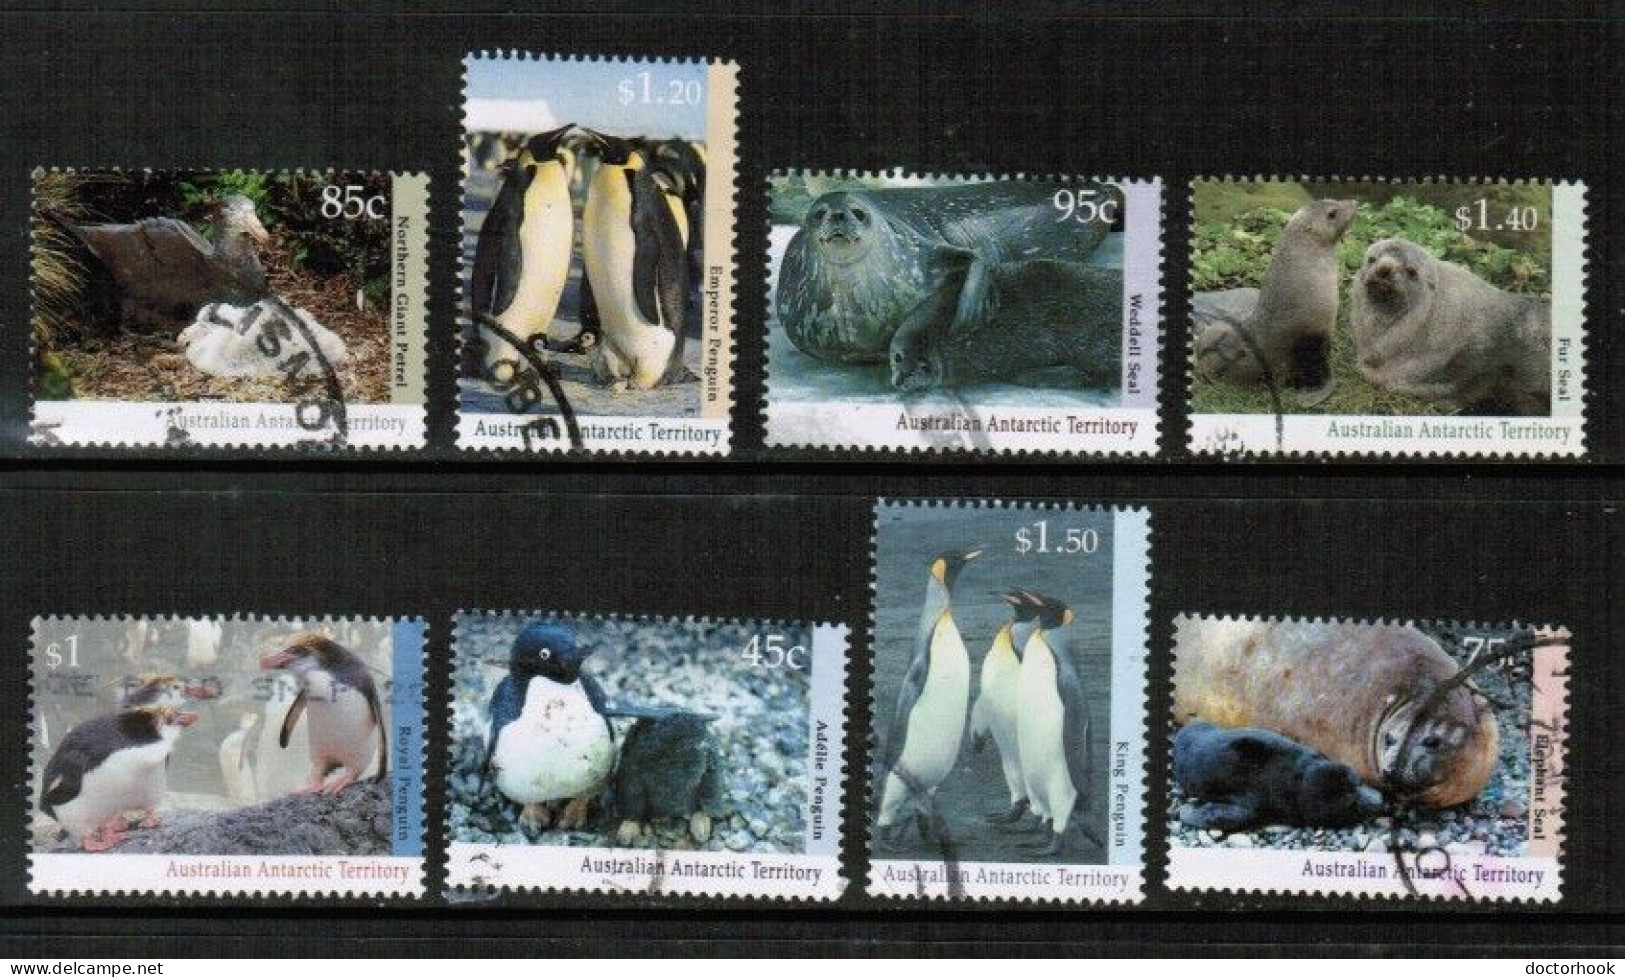 AUSTRALIAN ANTARCTIC TERRITORY   Scott # L 83-9 USED (CONDITION AS PER SCAN) (Stamp Scan # 928-1) - Oblitérés